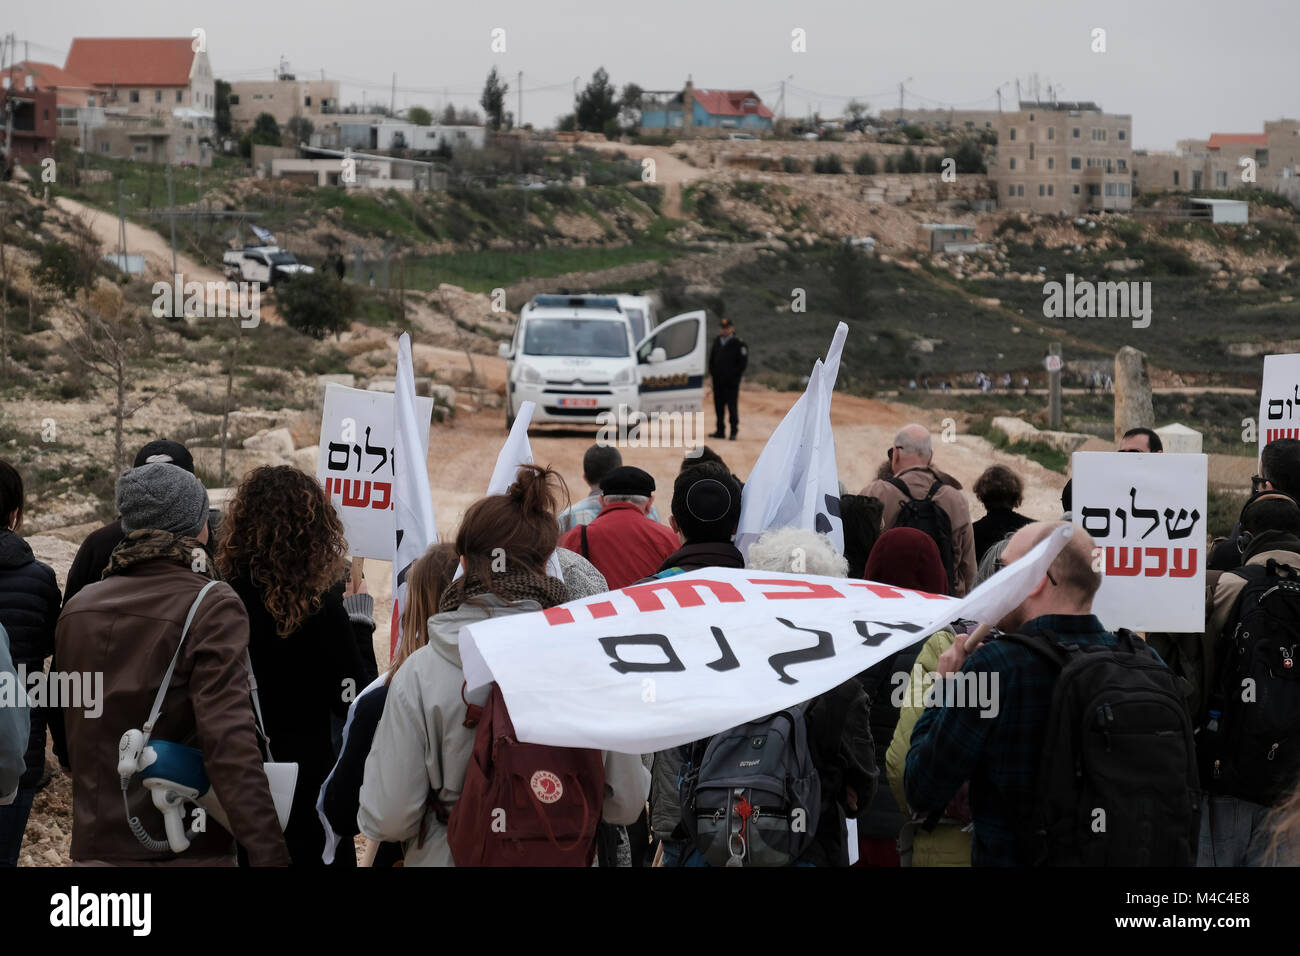 Nativ Ha'avot, Israel. 15th Feb, 2018. Members of the left-wing Peace Now movement taking part in a protest next to the illegal outpost of Nativ Ha'avot on following Israeli government attempts to postpone the removal of some of the houses in the outpost despite the Supreme Court ruling after accepting the petition of a group of Palestinians who argued the homes had been partially built illegally on their land. Credit: Eddie Gerald/Alamy Live News Stock Photo